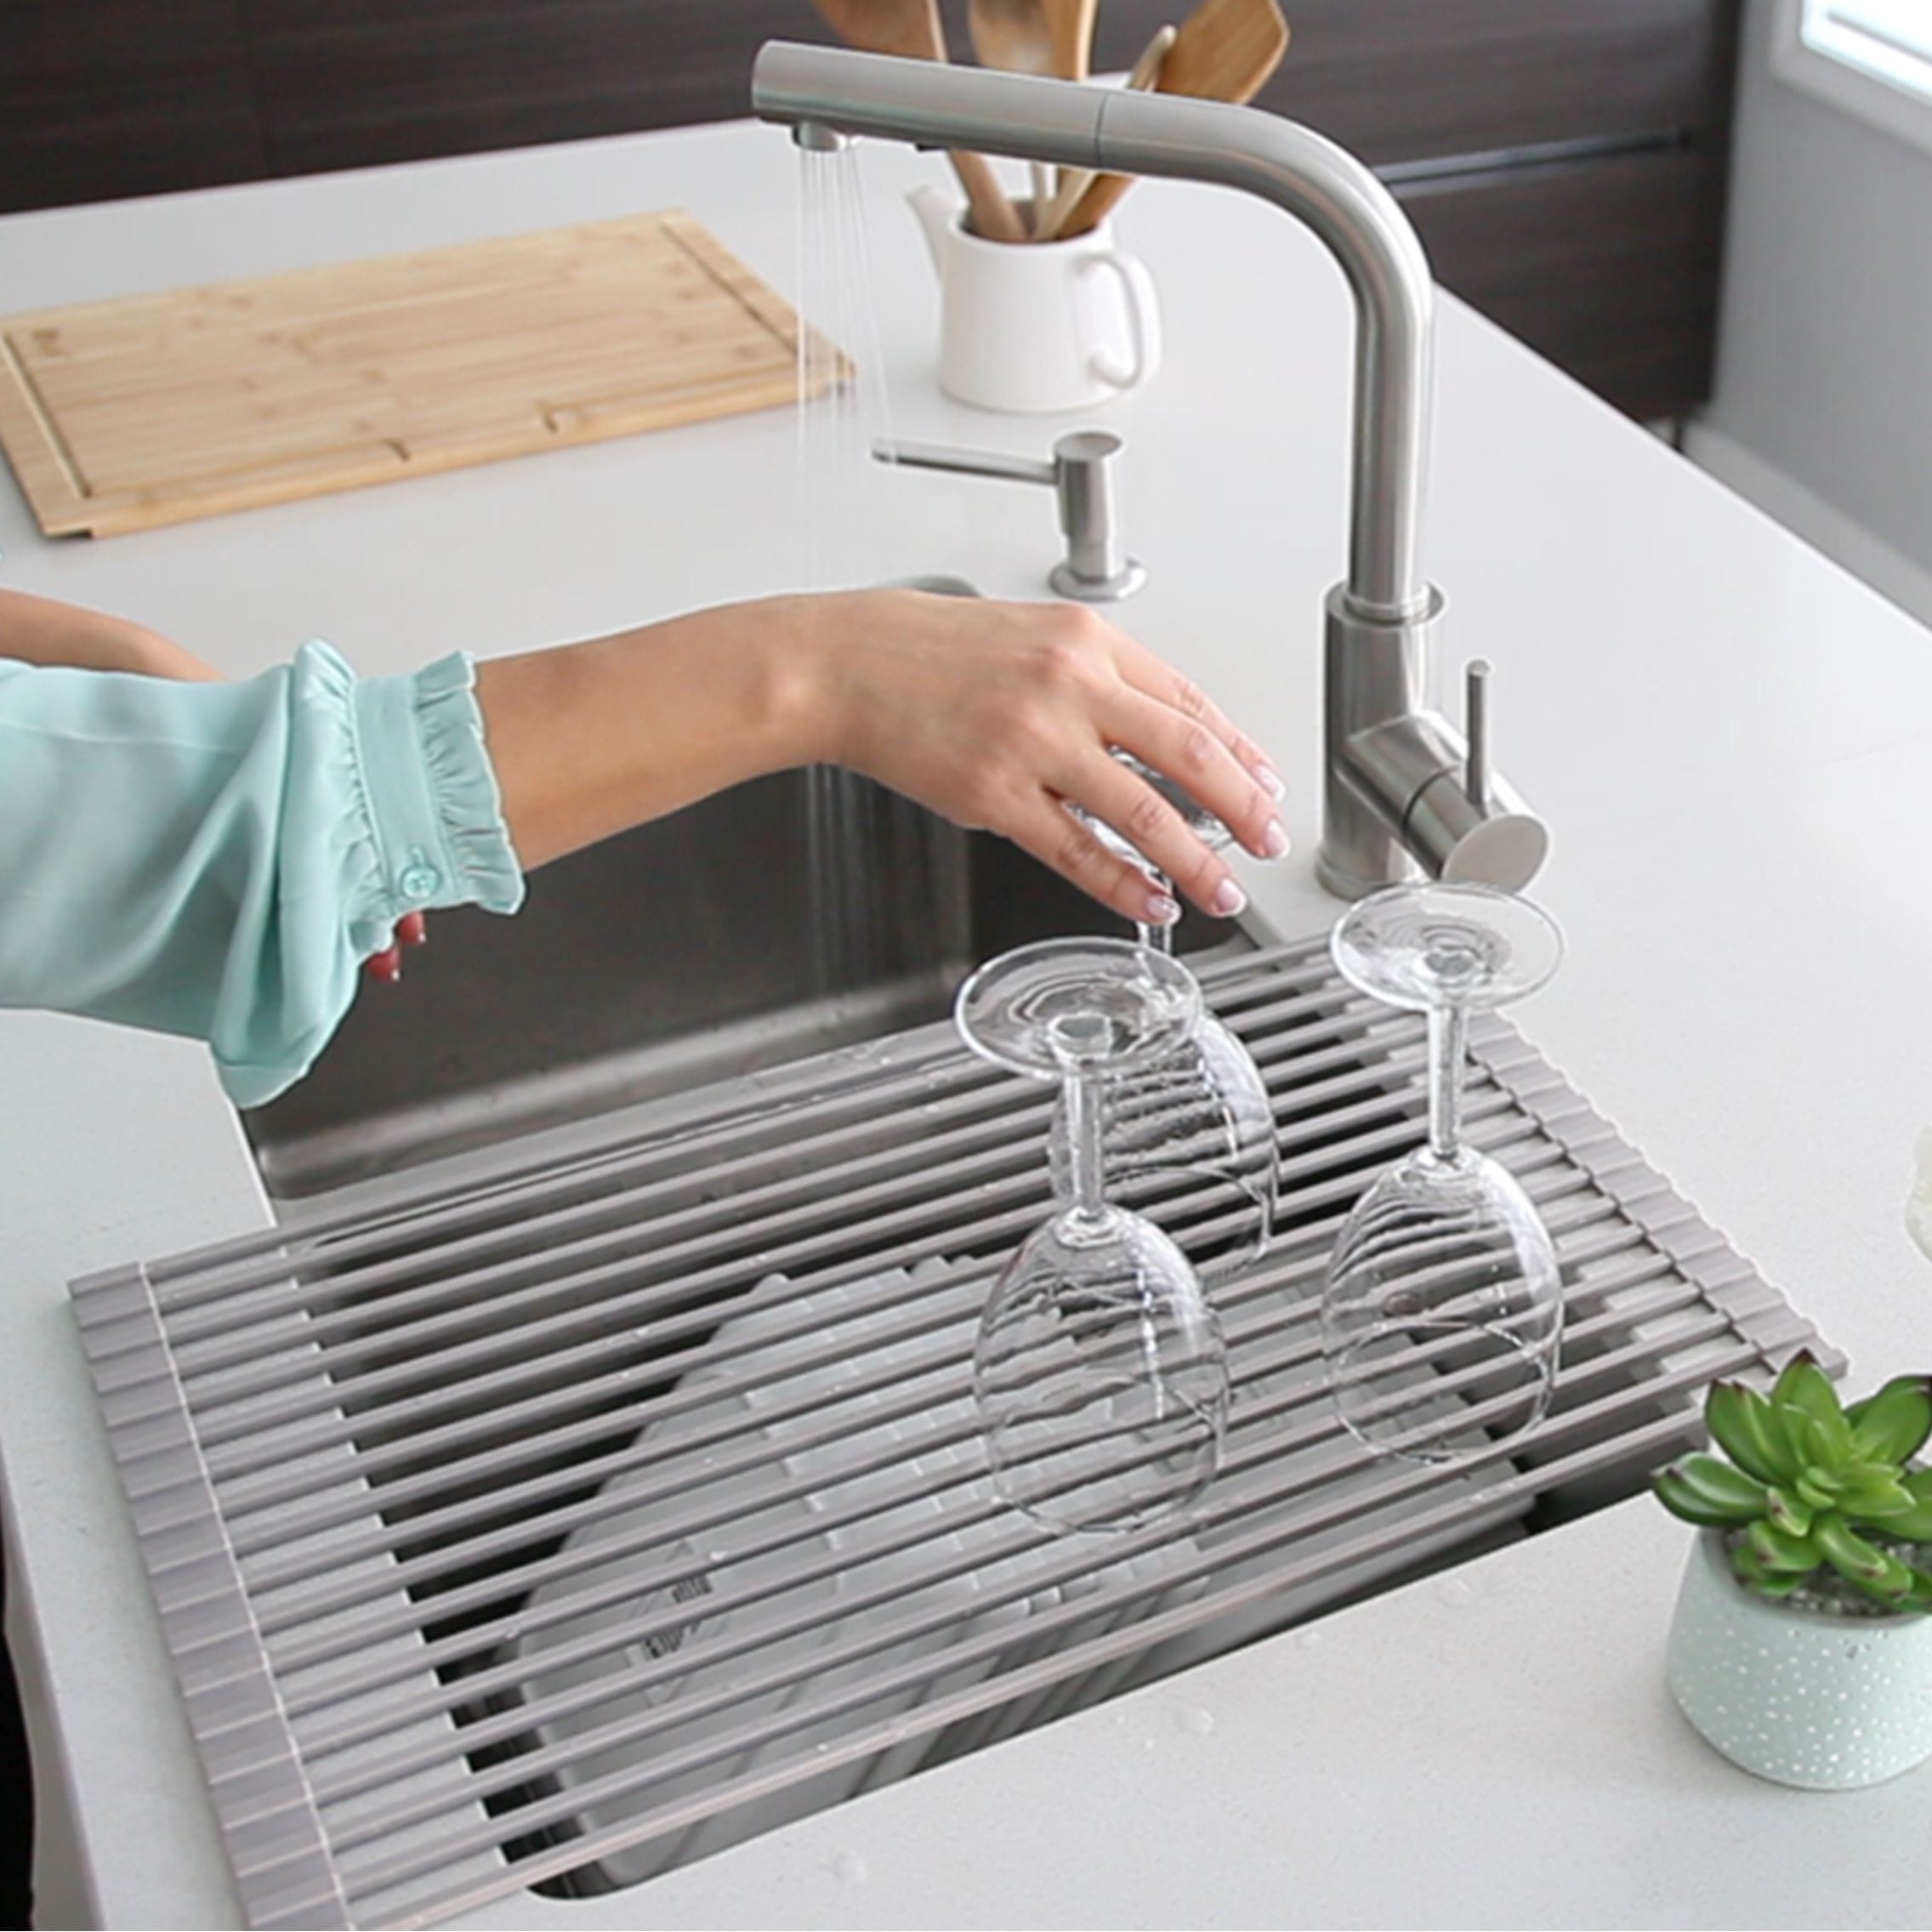 https://ak1.ostkcdn.com/images/products/is/images/direct/ab9986216c882b51e3cd67a7e9b1e8f84aa23df9/STYLISH-Multipurpose-Over-Sink-Roll-Up-Dish-Drying-Rack.jpg